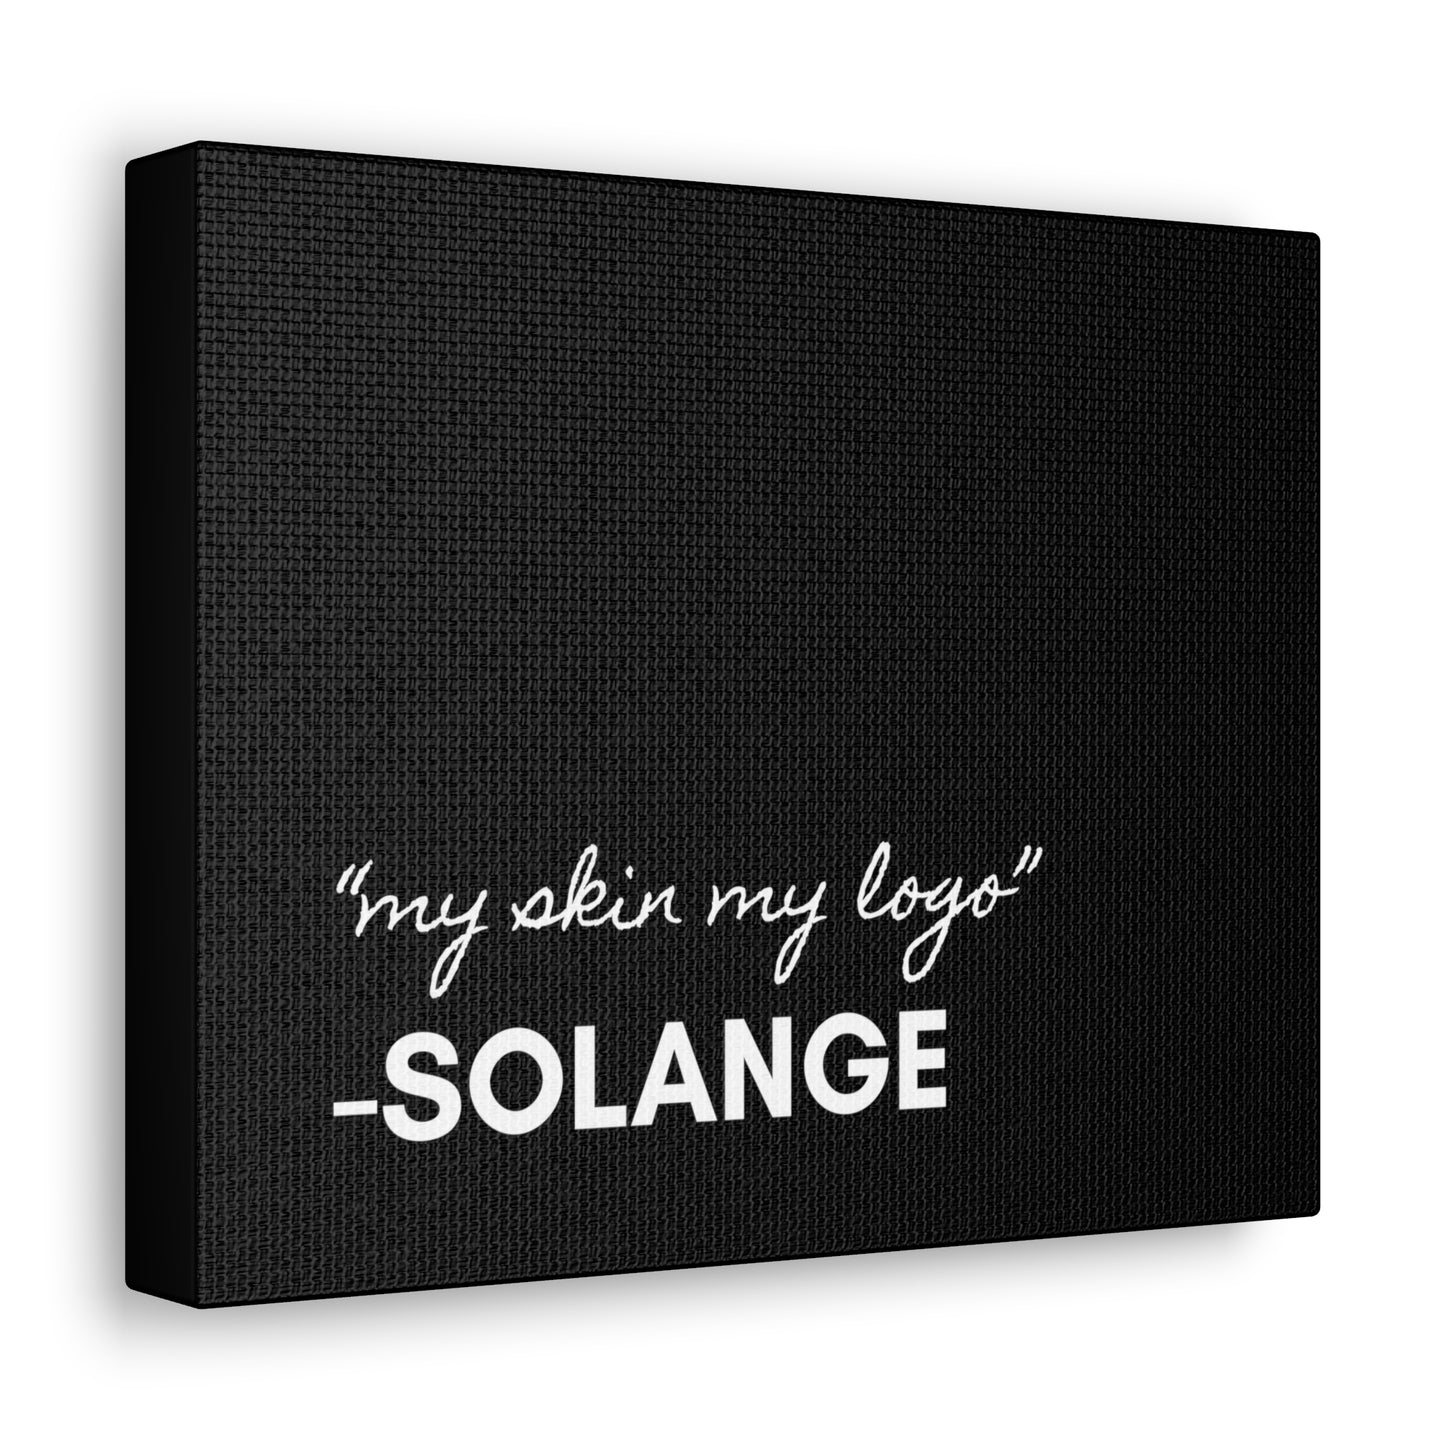 Words from Solange